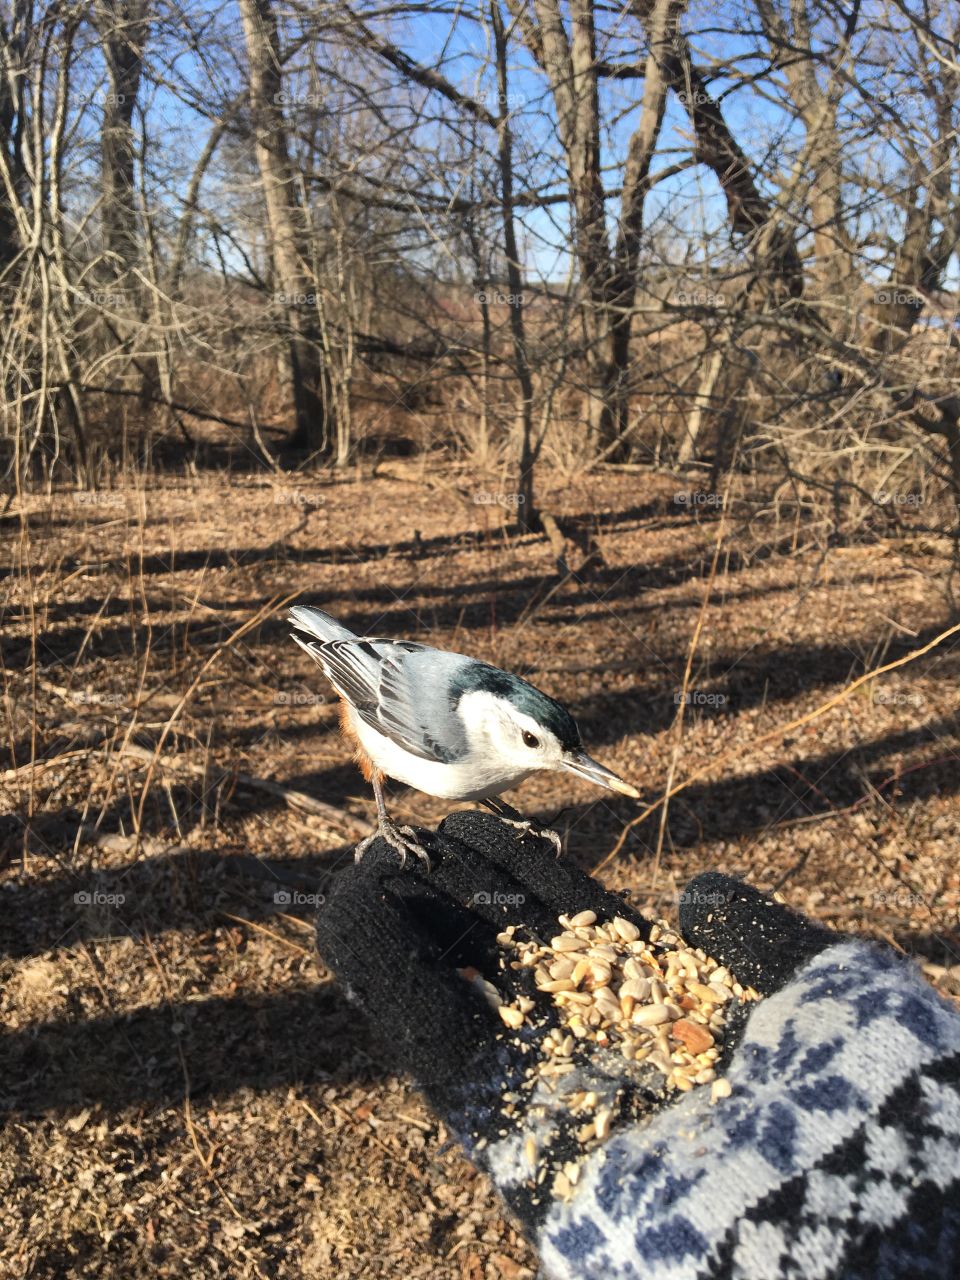 In early winter I am feeding a bird. The species is a Nuthatch. In rural Ontario at a nature conservation area. Has blue/grey markings with and orange butt.